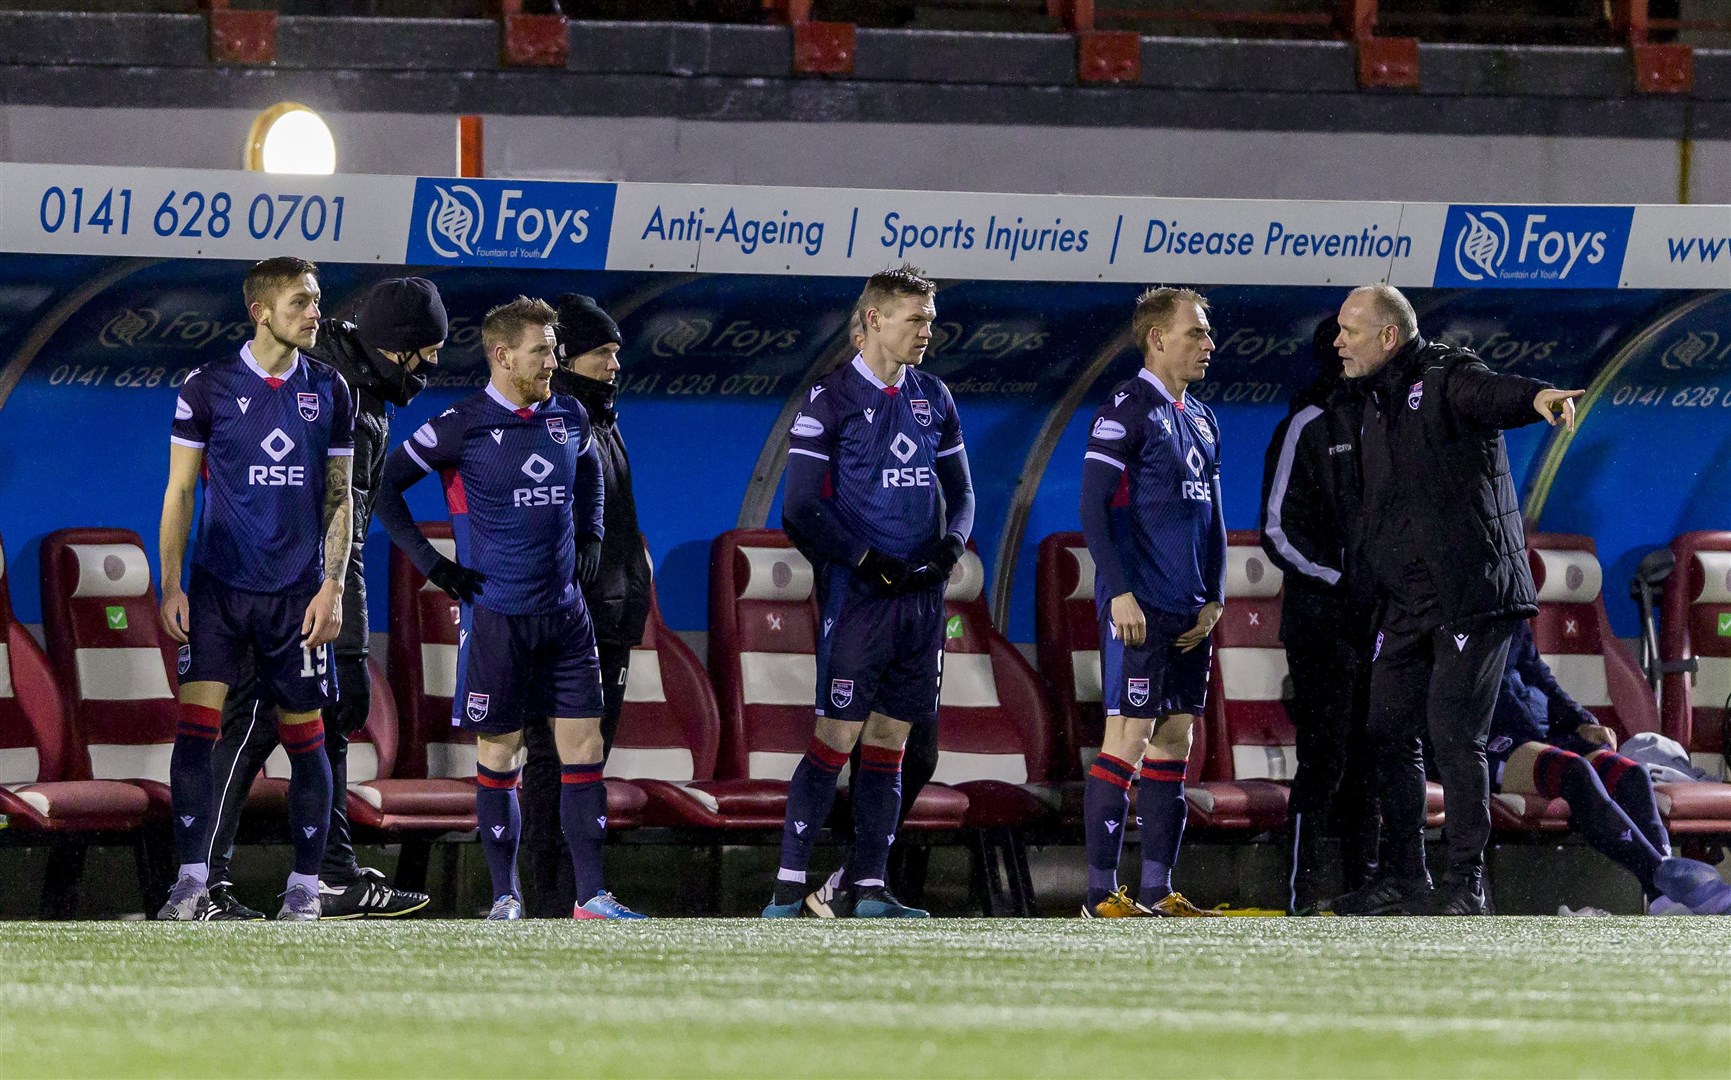 Picture - Ken Macpherson, Inverness. Hamilton Accies(1) v Ross County(2). 03/02/21. Ross County manager John Hughes brings on 4 subs.